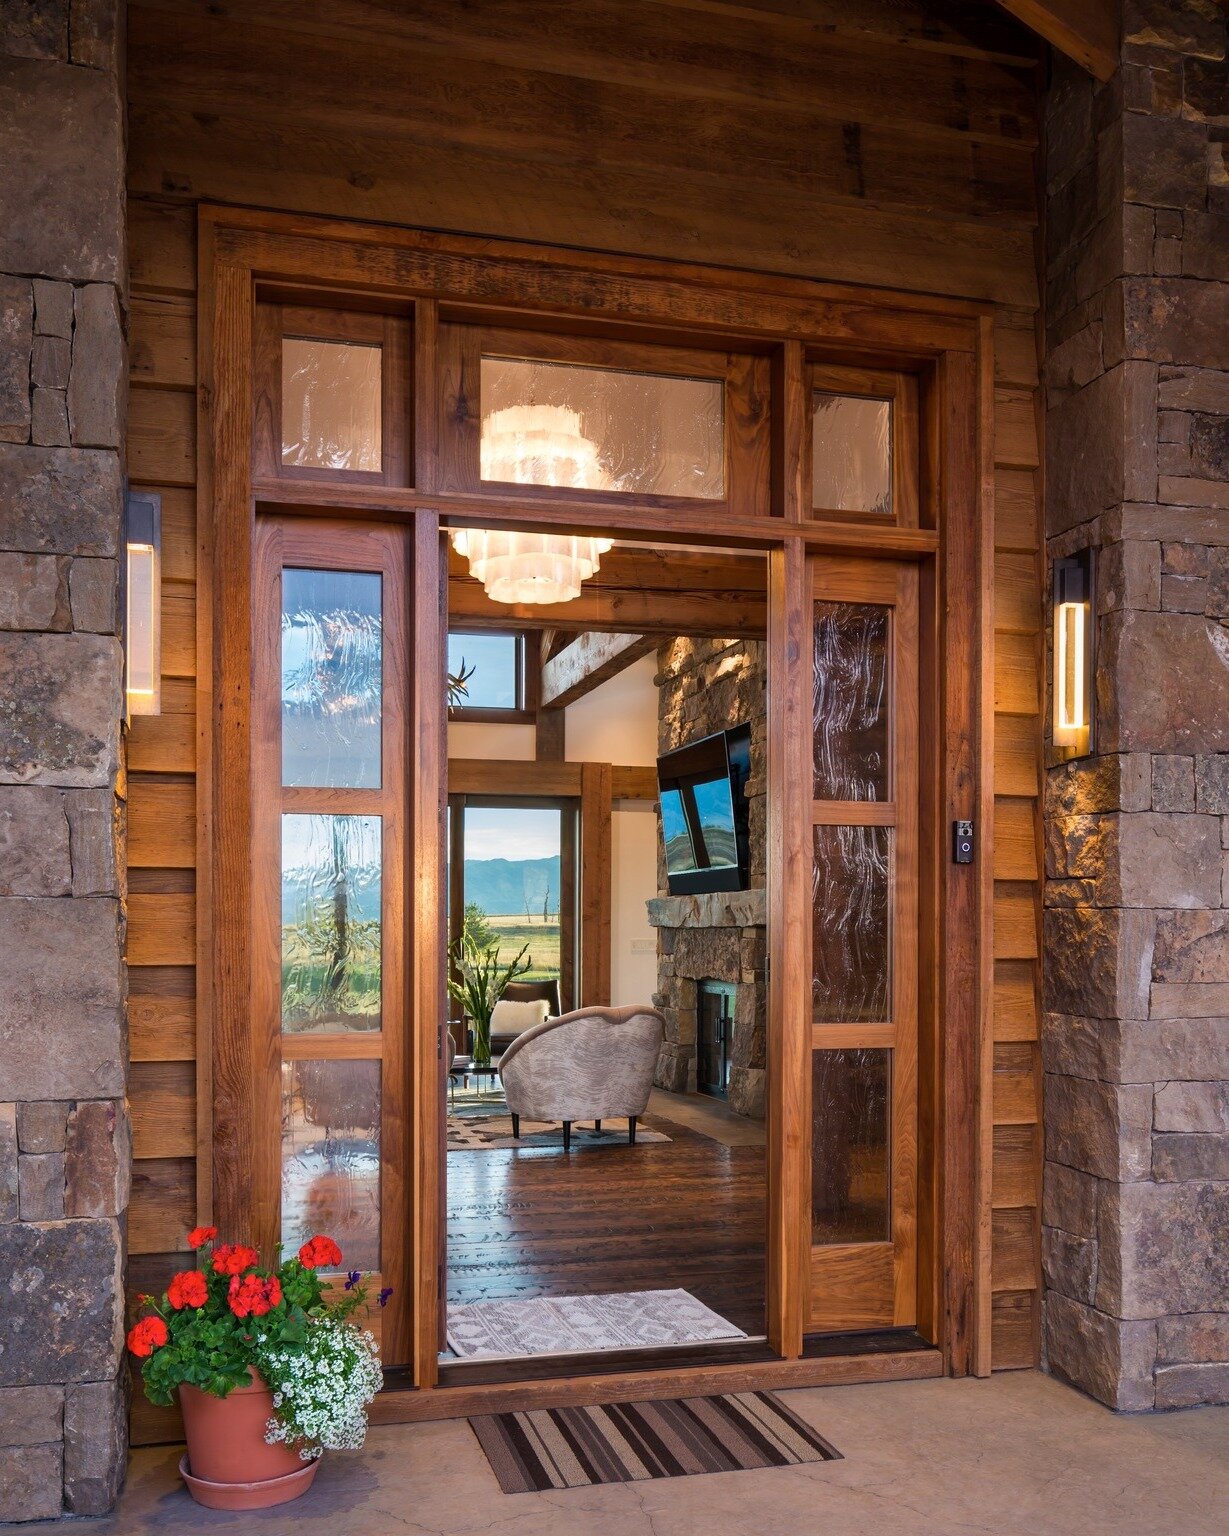 Opening doors to a world of awe-inspiring beauty and refined living as you're greeted by this stunning front door. Beyond its inviting threshold lies a seamless connection to nature's splendor. A glimpse through to the back door reveals a private gol